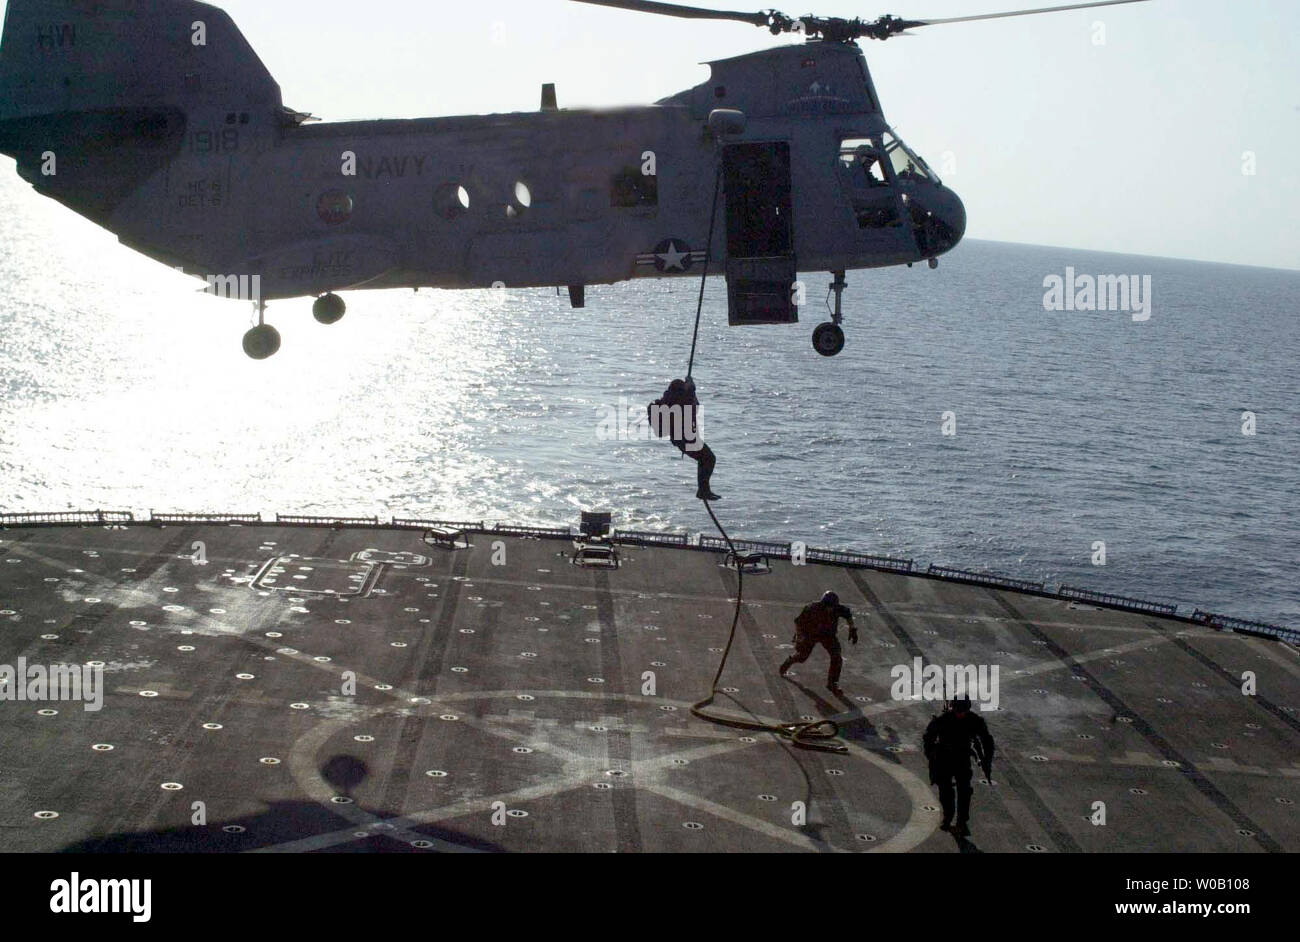 WAX2003011702- At sea aboard USS Mount Whitney, Jan. 17 (UPI) - A U.S. Navy SEAL (SEa, Air, and Land) fast-ropes from an MH-53 ÒPave LowÓ helicopter during a Maritime Interception Operation training exercise.  U.S. Navy SEALs are deployed throughout the world conducting missions in support of Operation Enduring Freedom.        cc/USN/George R. Kusner    UPI Stock Photo